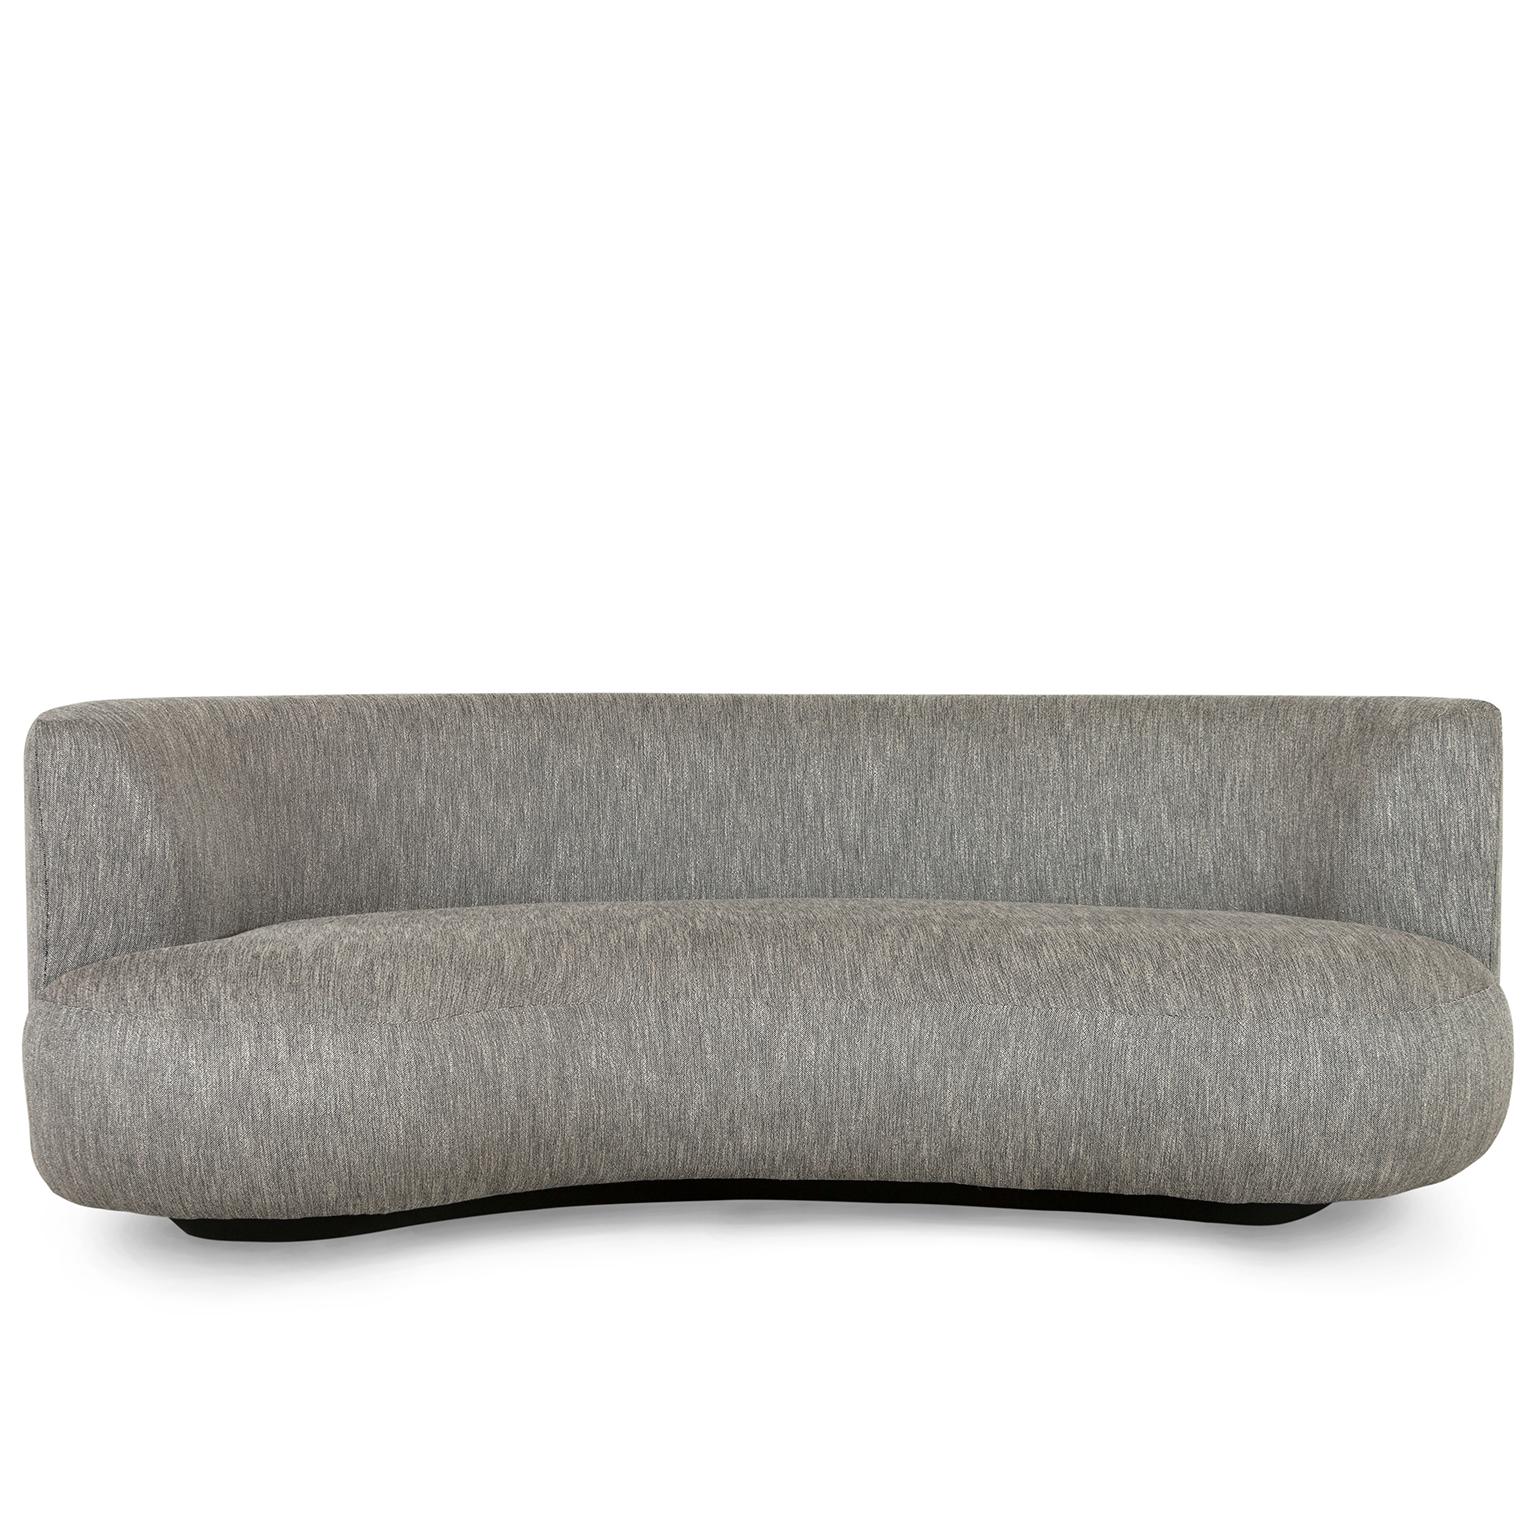 Lacquered Modern Twins Outdoors Sofa, Beige Woven, Handmade in Portugal by Greenapple For Sale